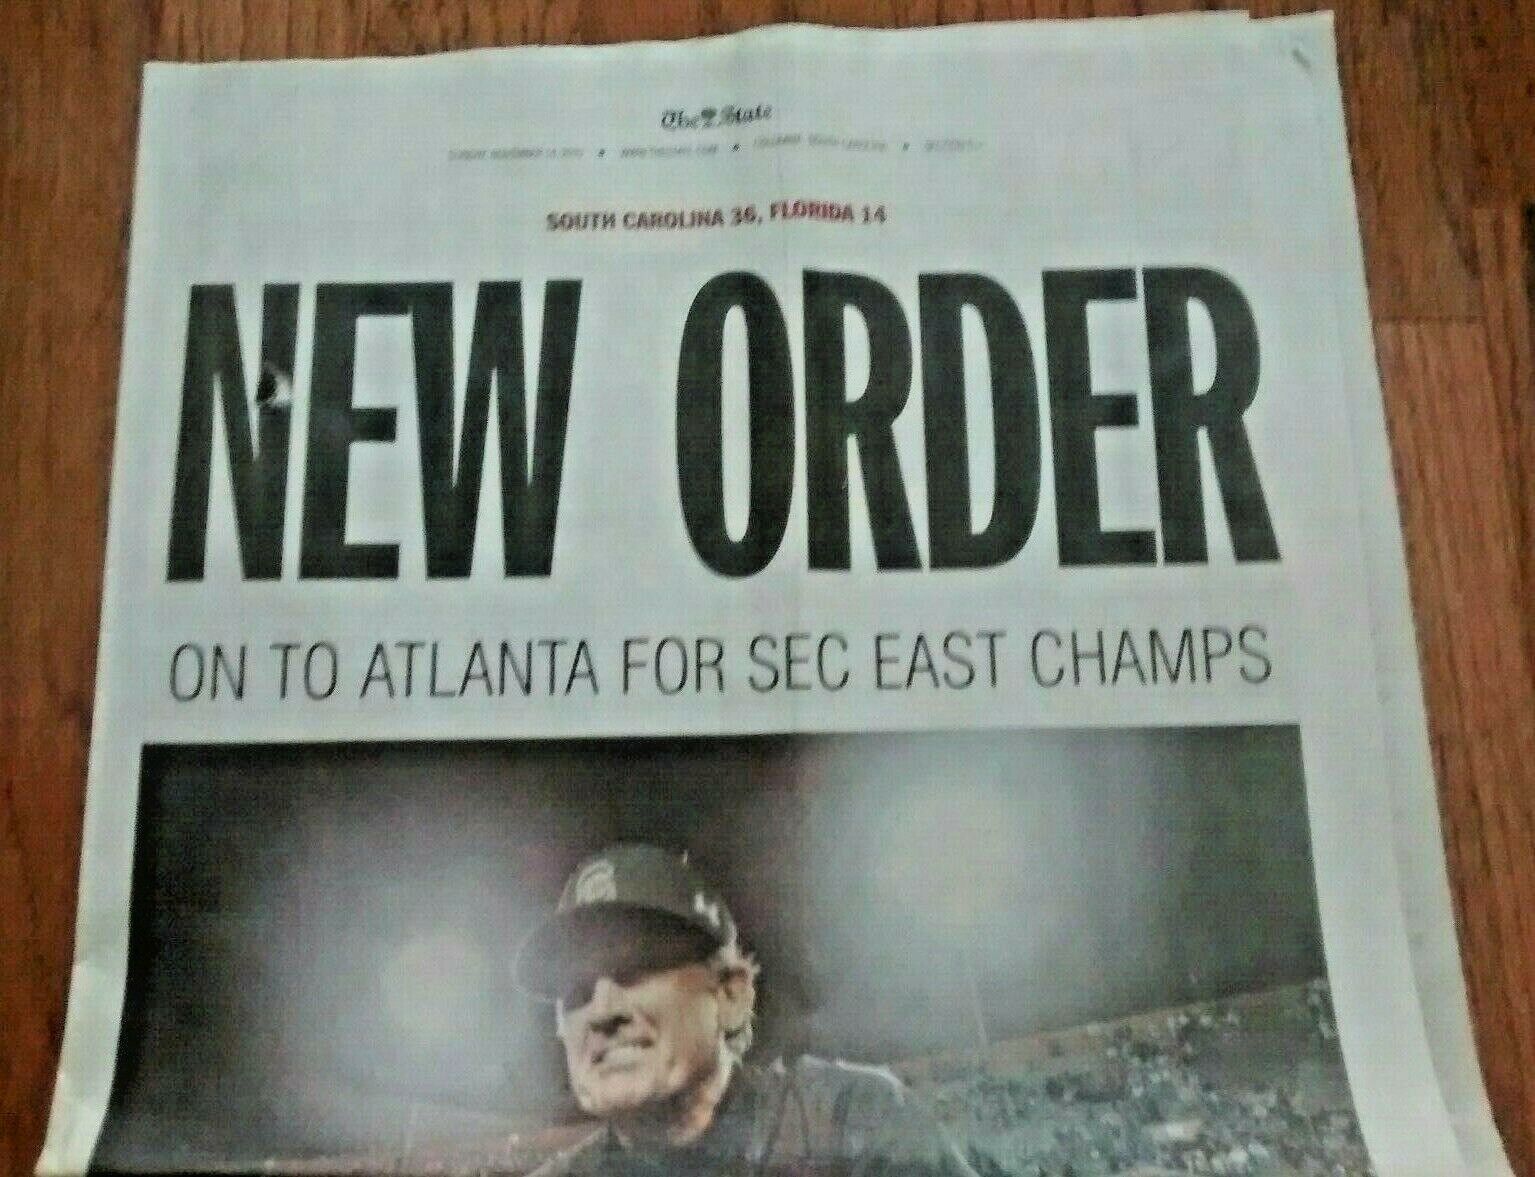 11-14-2010 The State Newspaper : NEW ORDER  USC beats FL for SEC EASTERN CROWN 